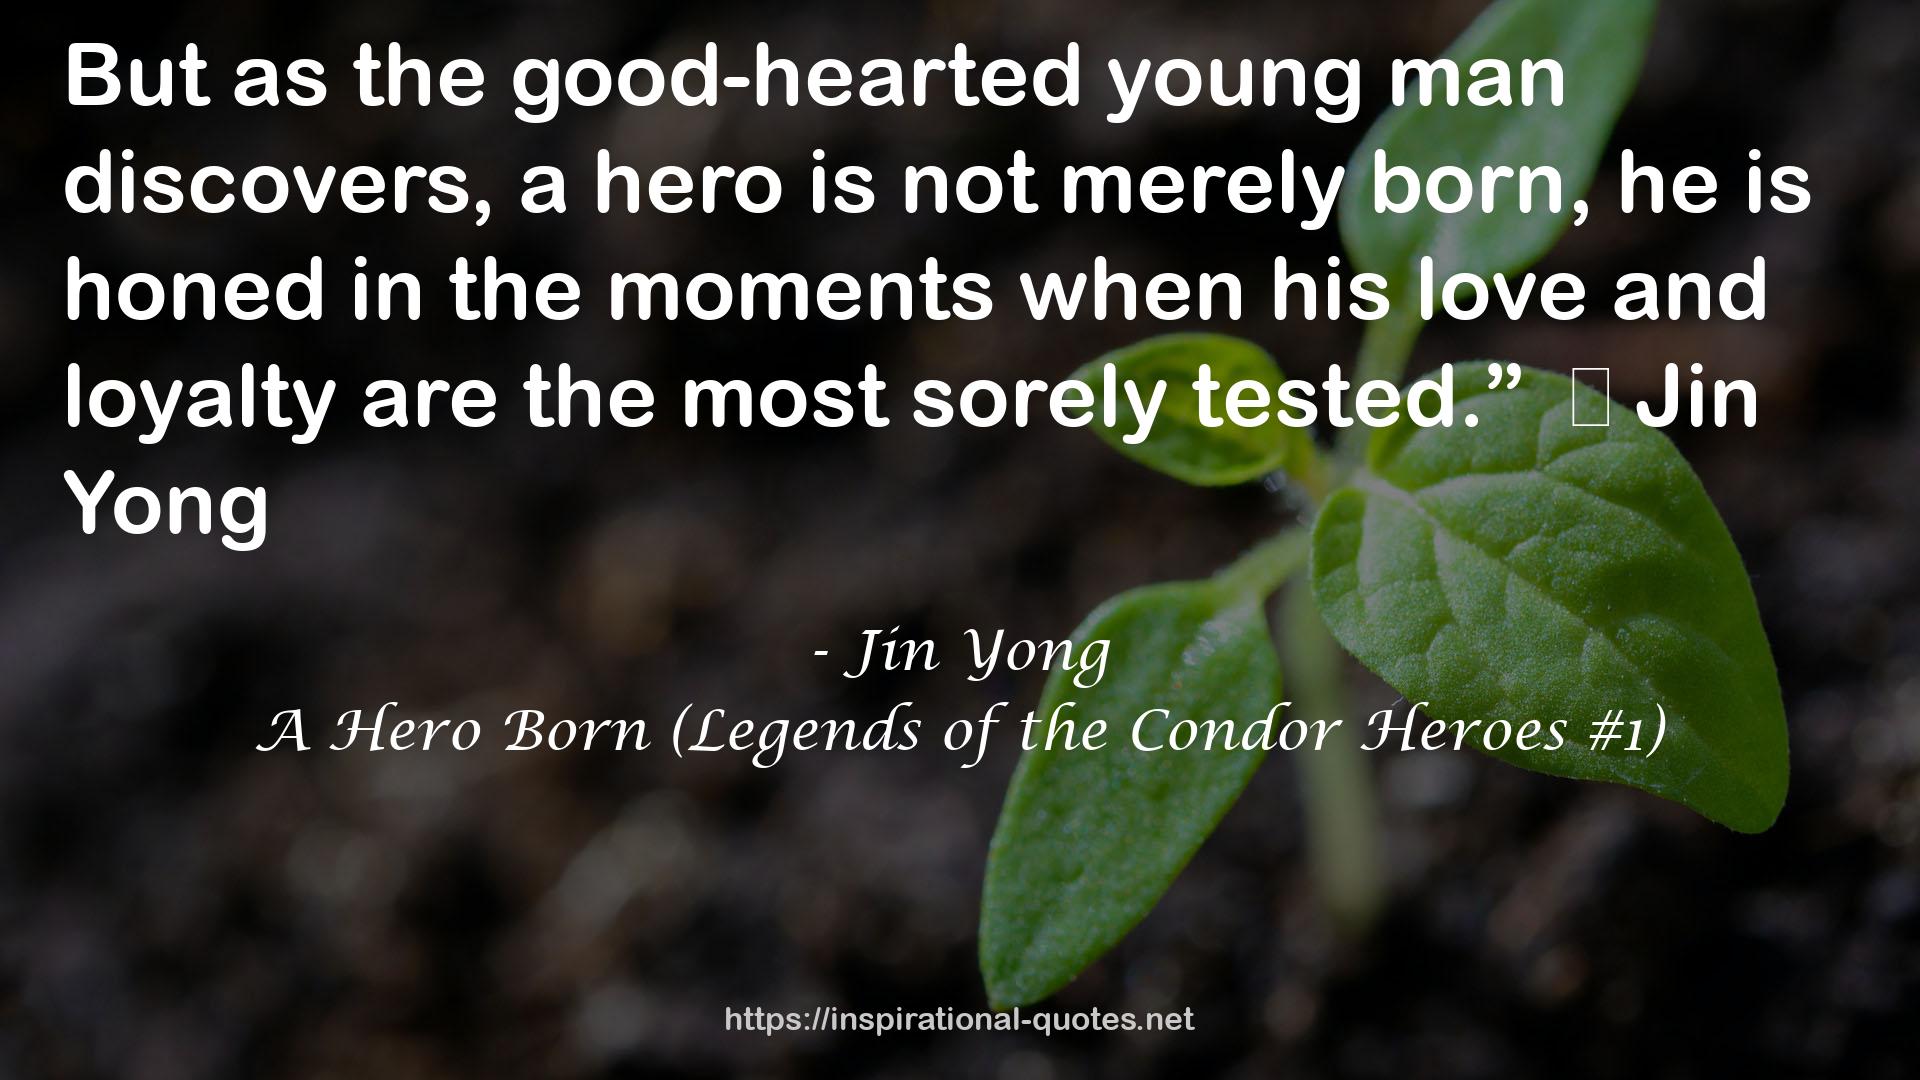 A Hero Born (Legends of the Condor Heroes #1) QUOTES